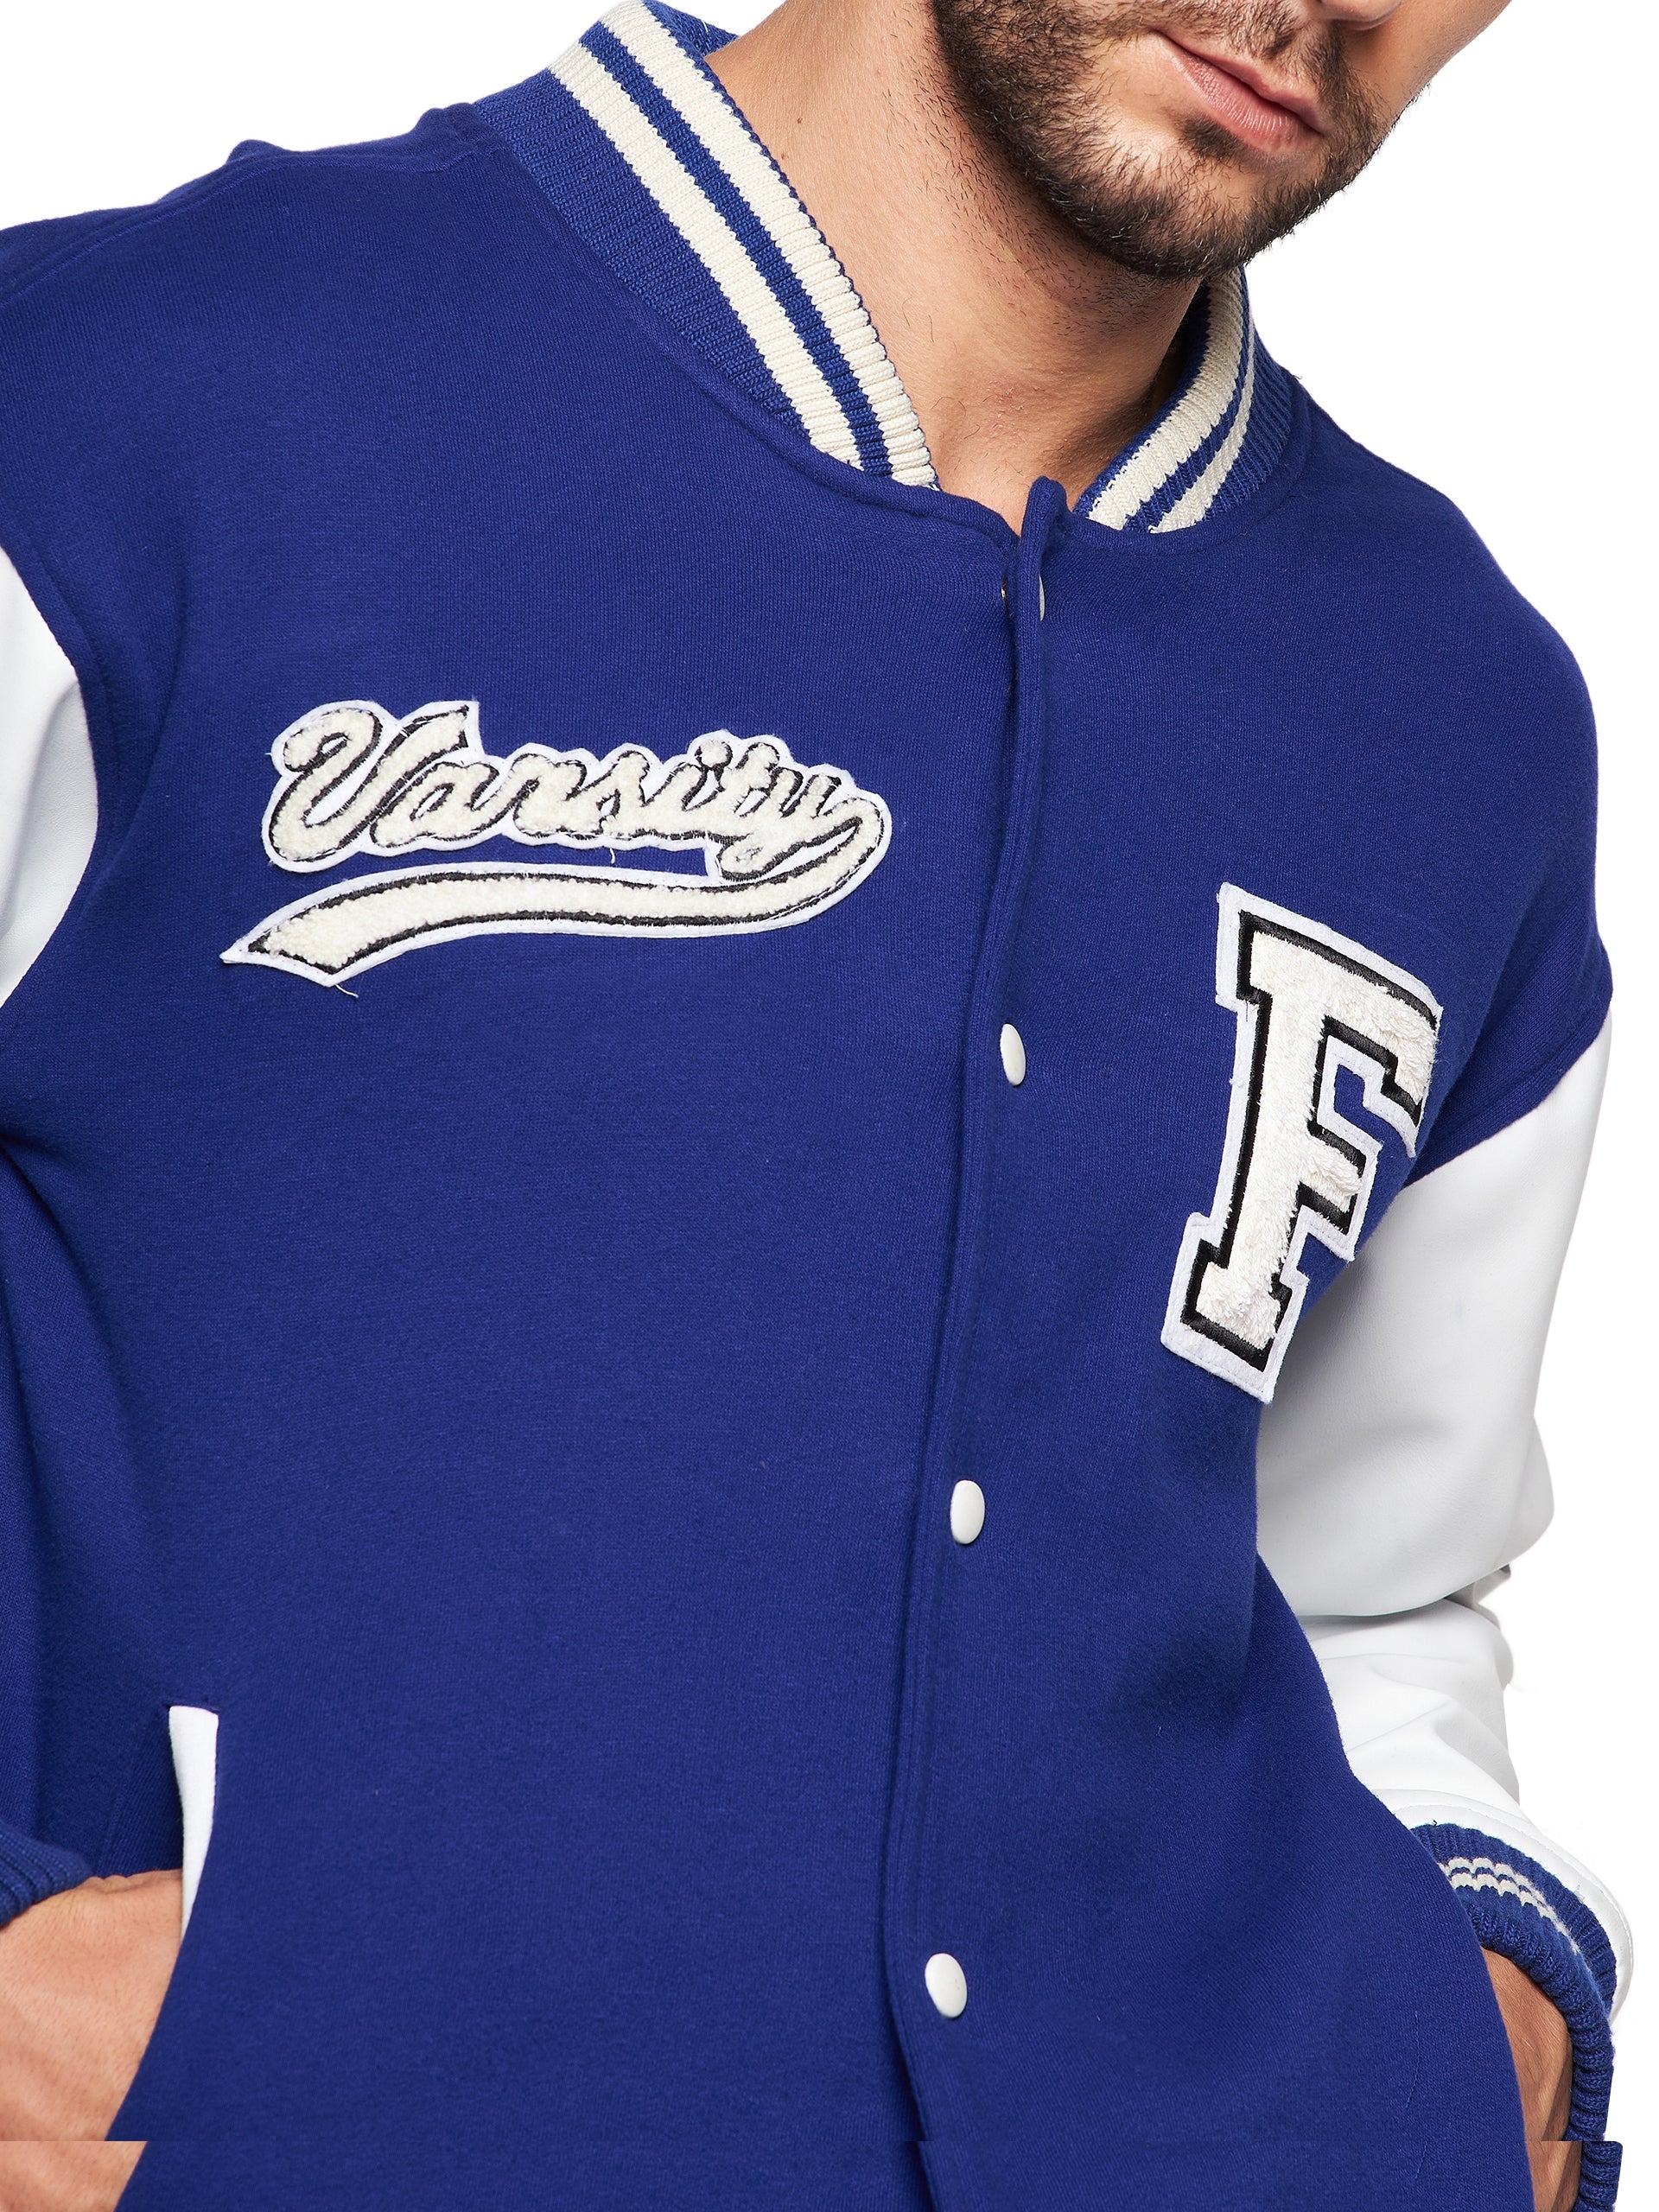 Navy Blue and Yellow Letterman Jacket | Varsity In Canada